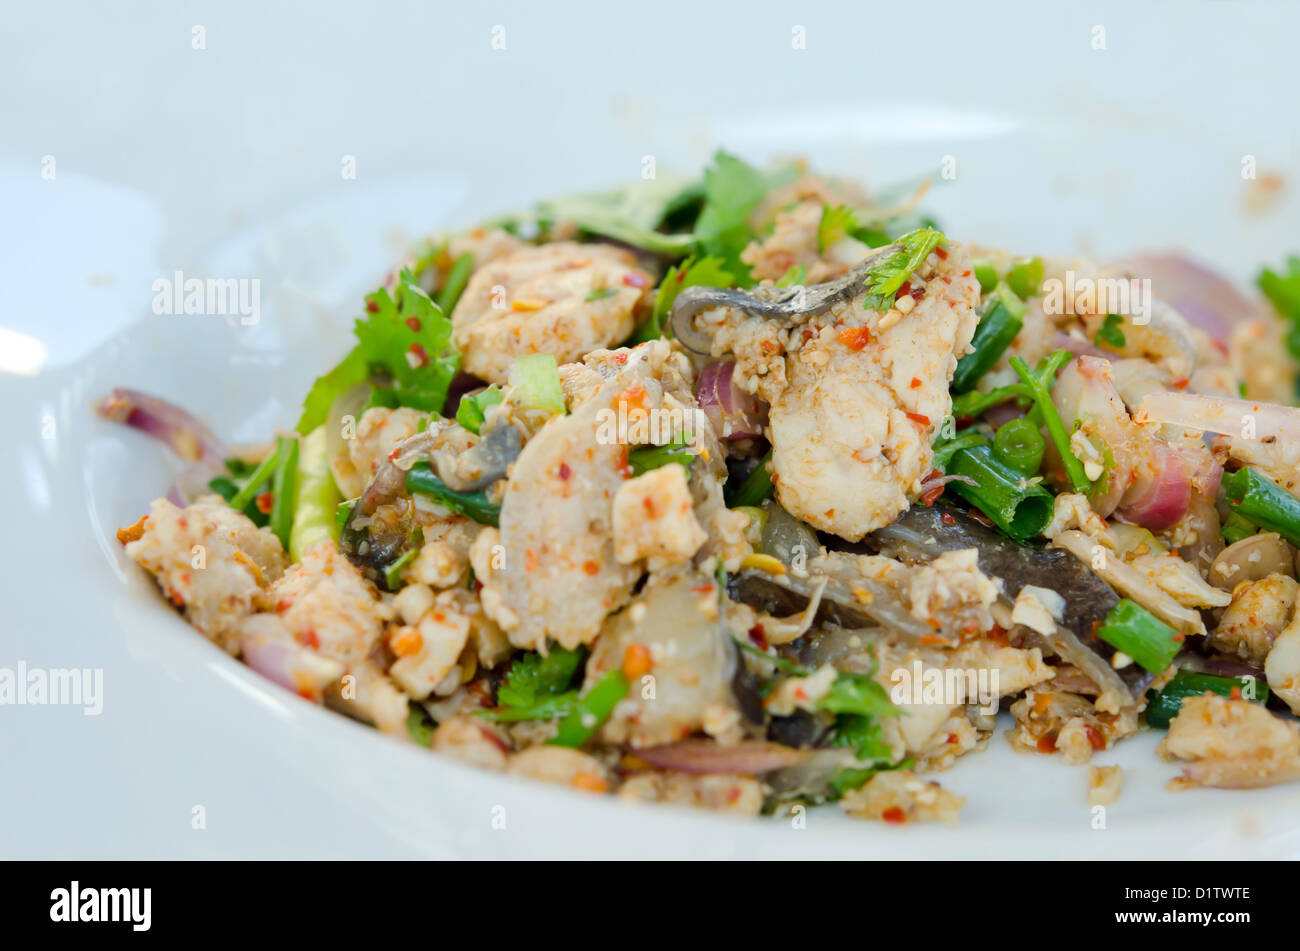 Thai dish of spicy minced fish with vegetable Stock Photo